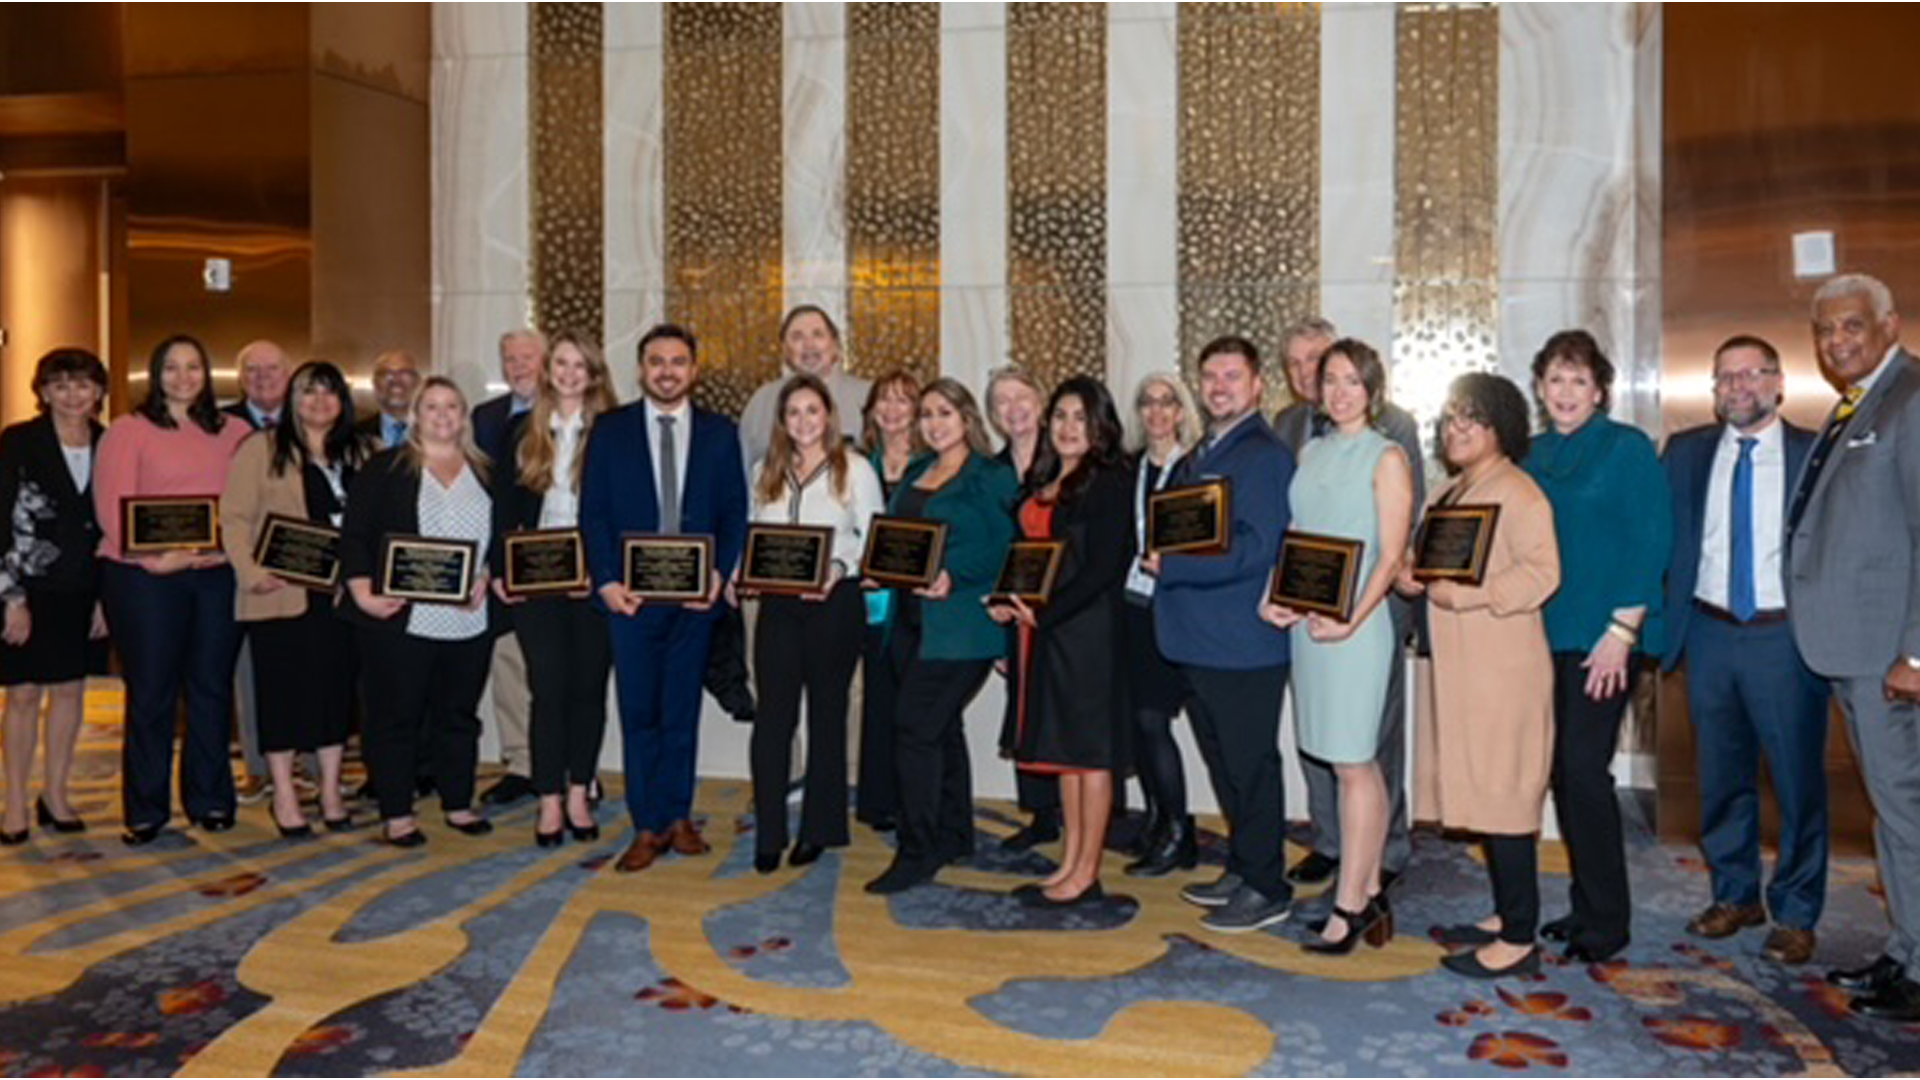 12 emerging health leaders with their awards